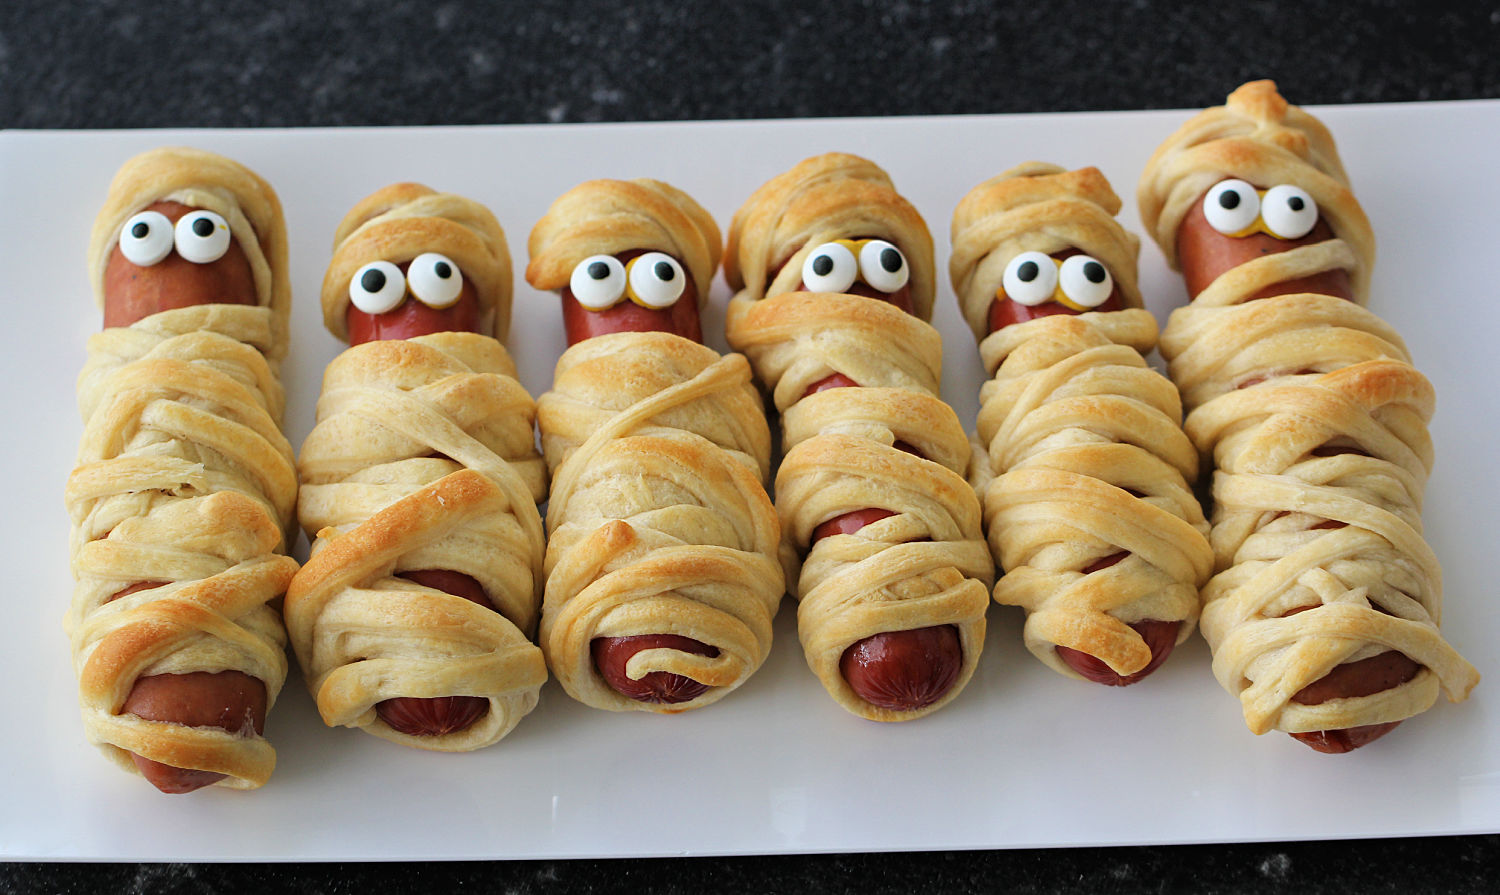 Our Halloween Mummy Dogs are the perfect dinner for Halloween!